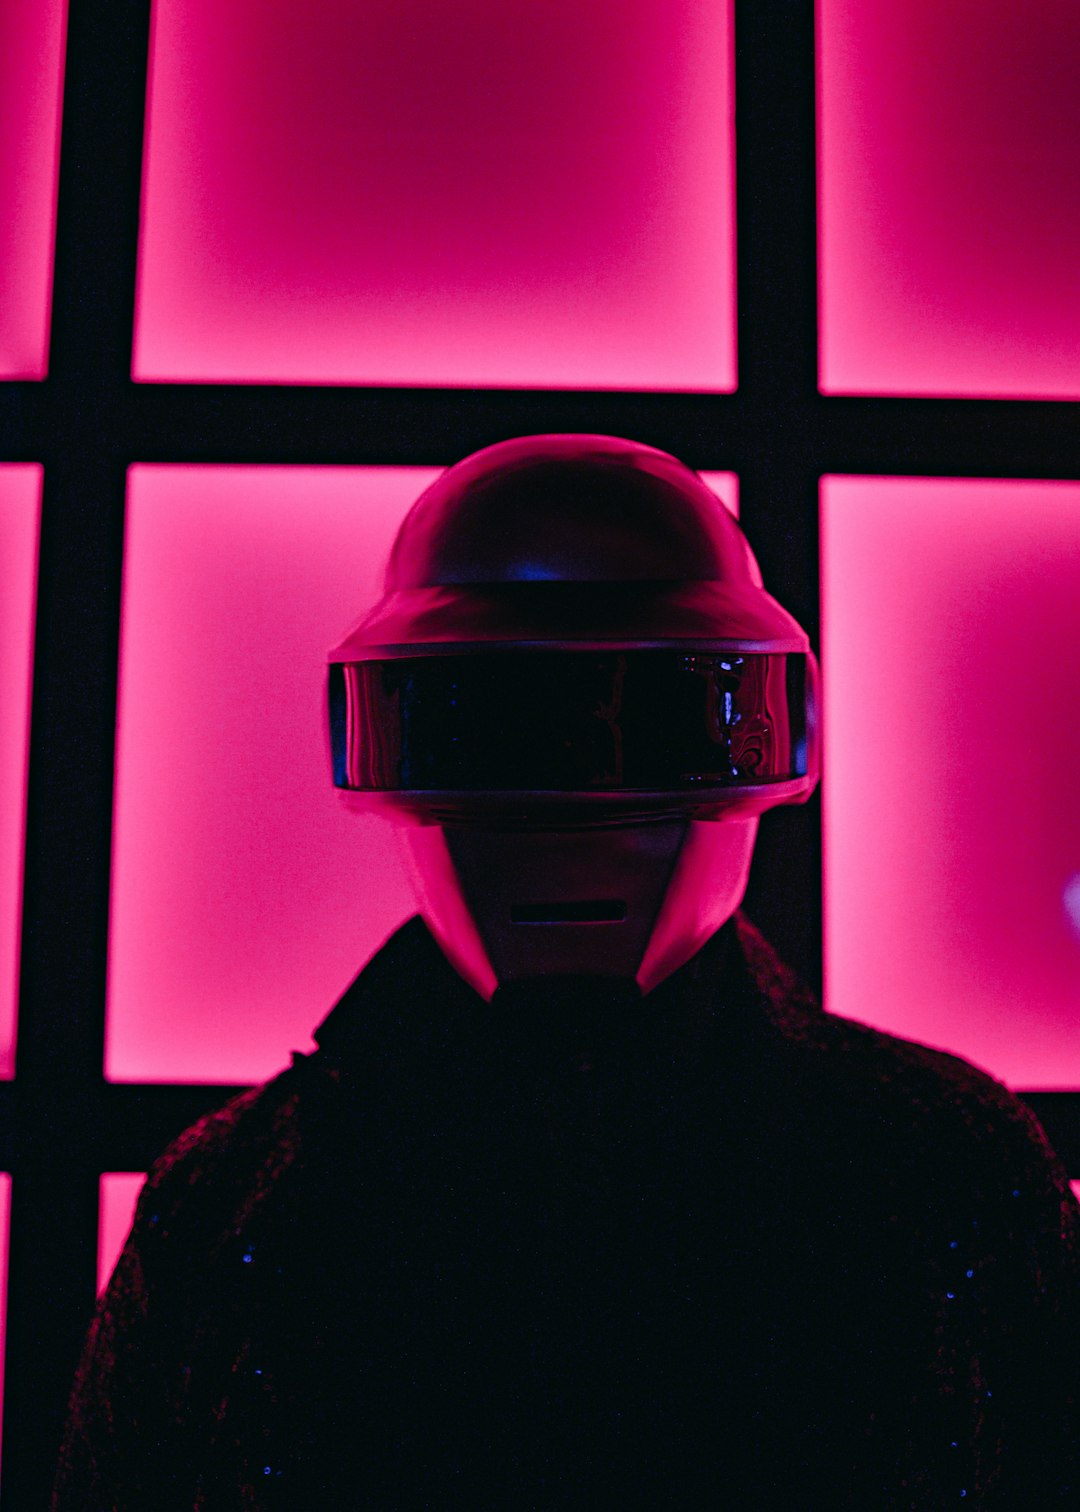 a person wearing a helmet standing in front of a wall of pink squares